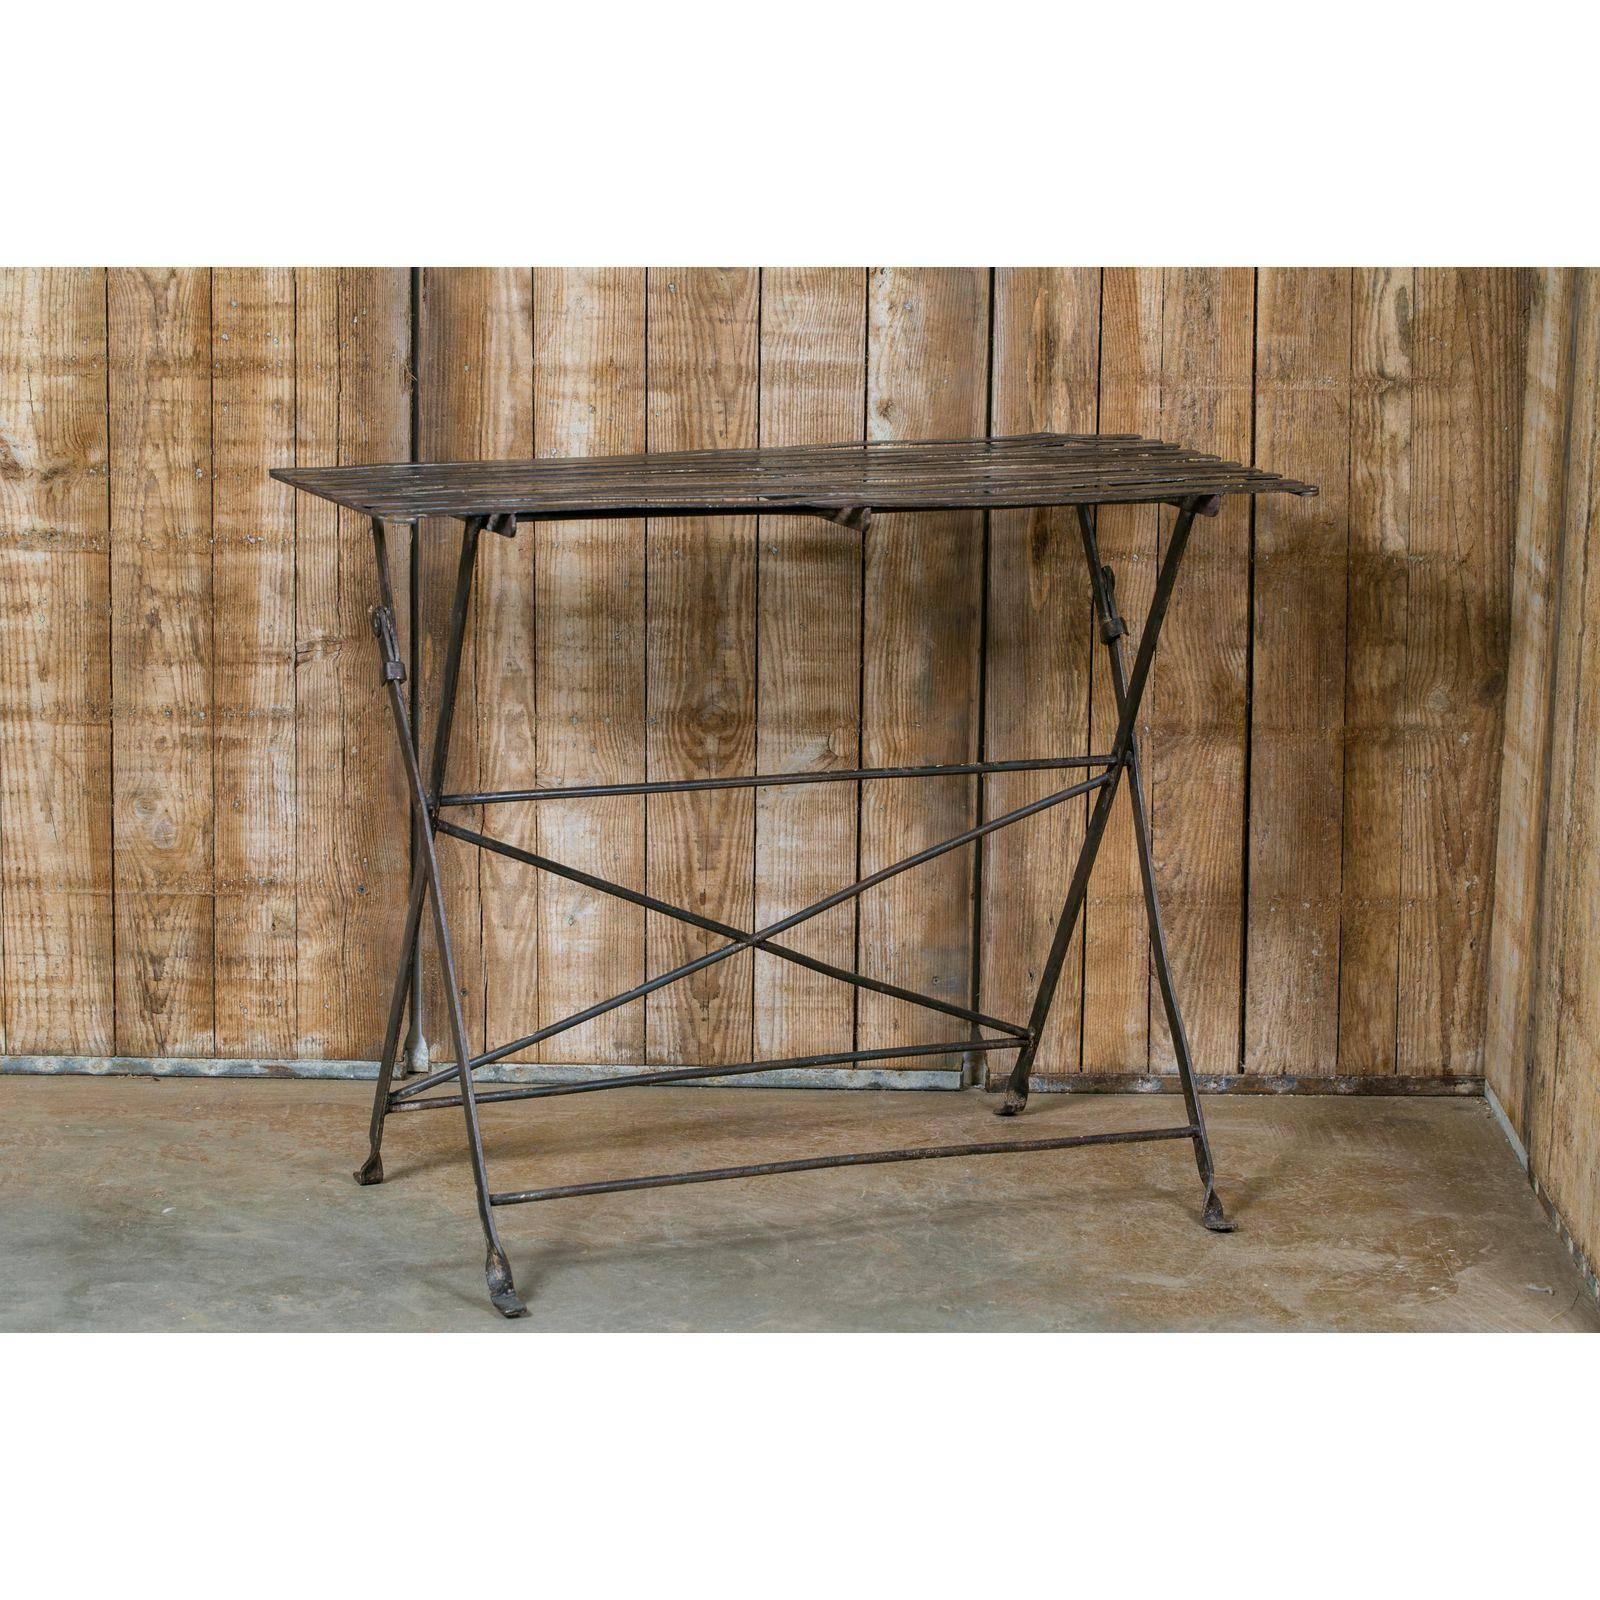 Long iron rectangular table with a metal slat top. Folds up for compact storage. From France, circa 1920.